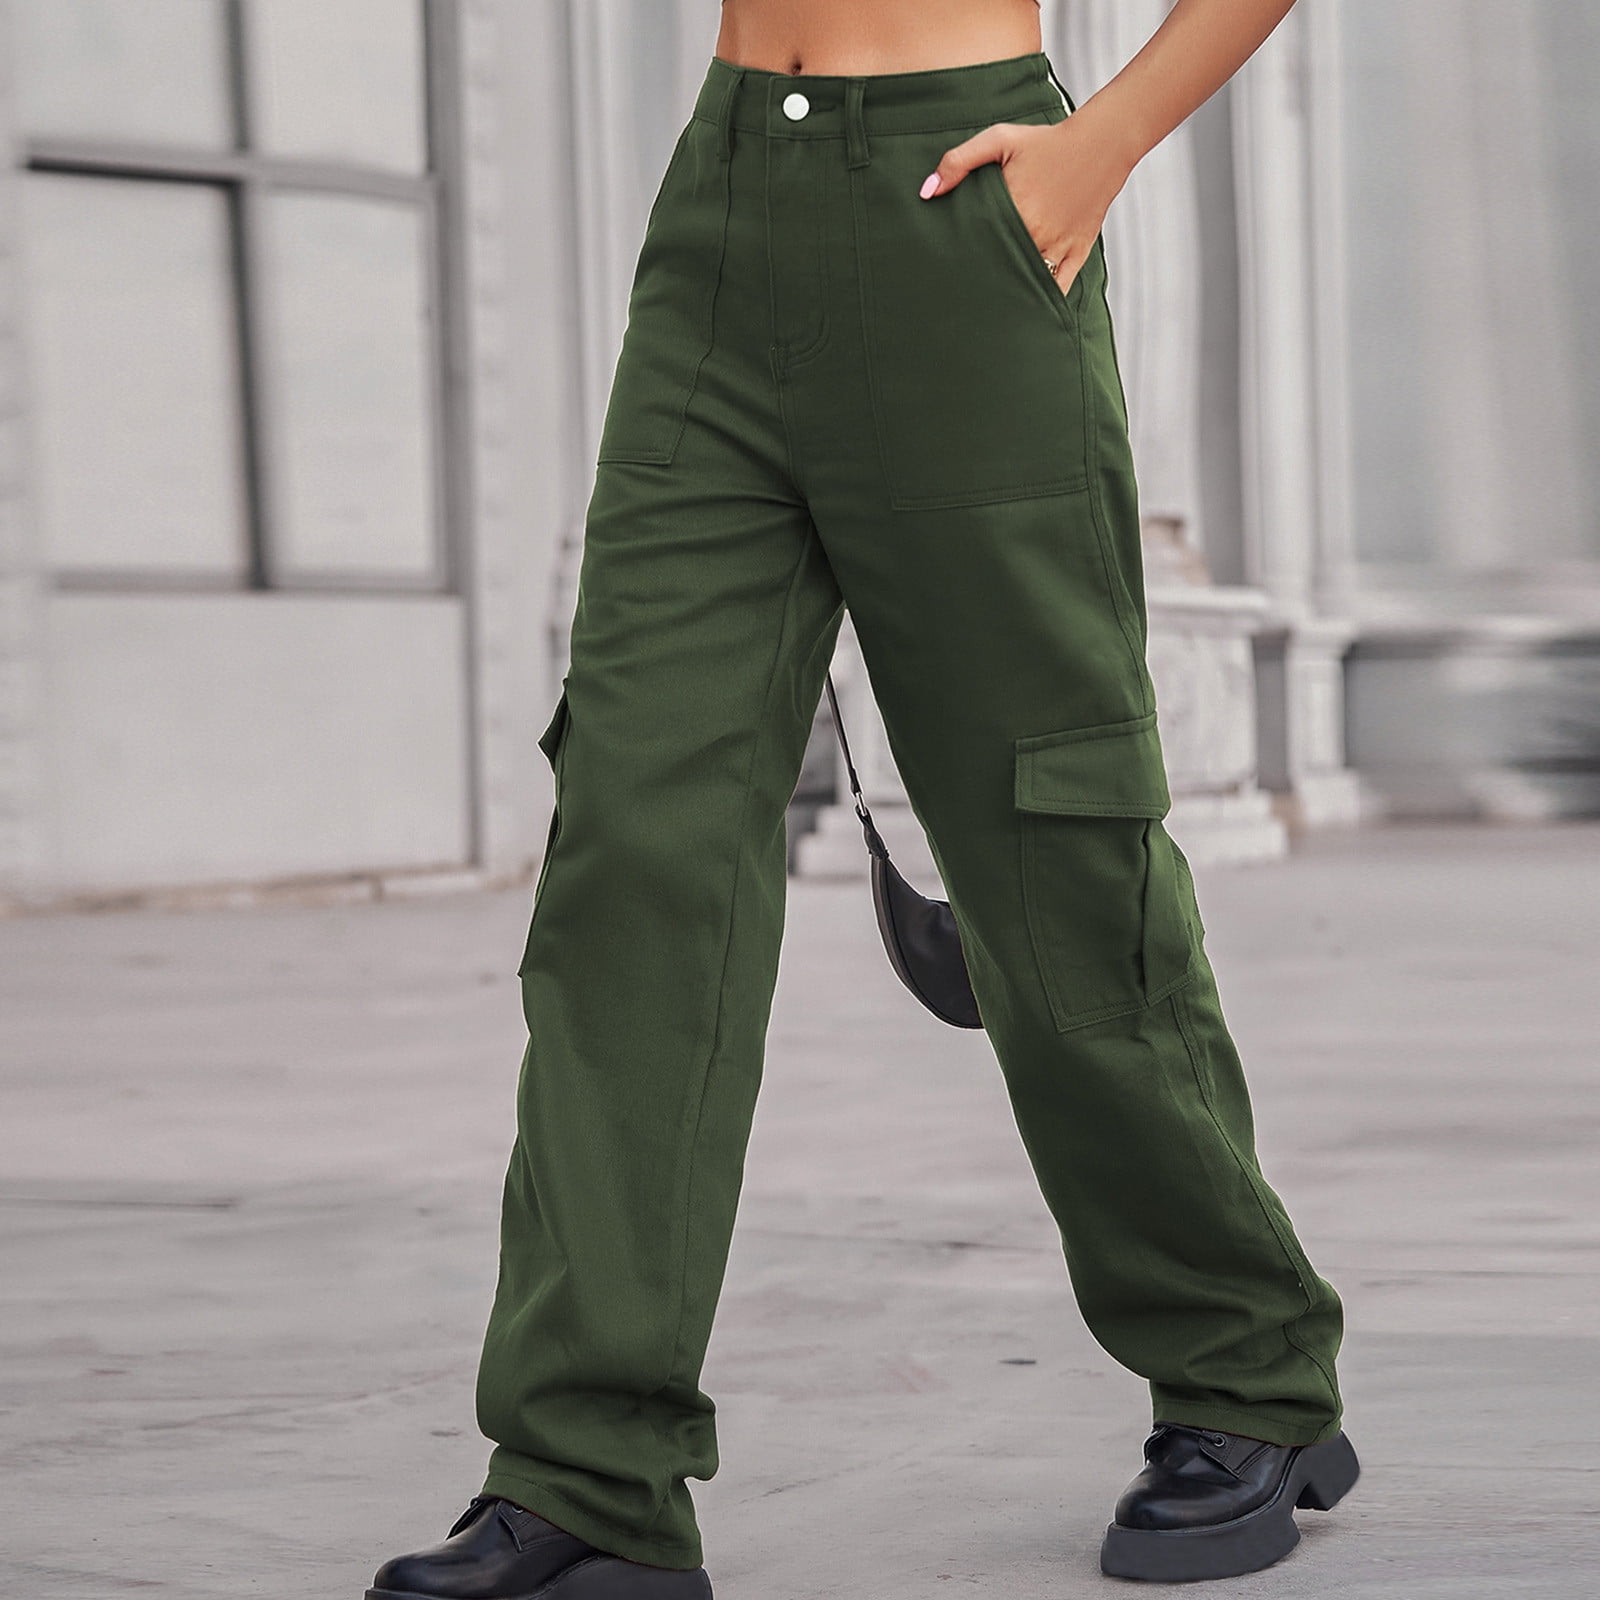 SELONE Cargo Pants Women Plus Size With Pockets Denim Casual Long Pant  Straight Leg Solid Pants Hippie Punk Trousers Jogger Loose Overalls s for  Everyday Wear Running Work Casual Event Army Green